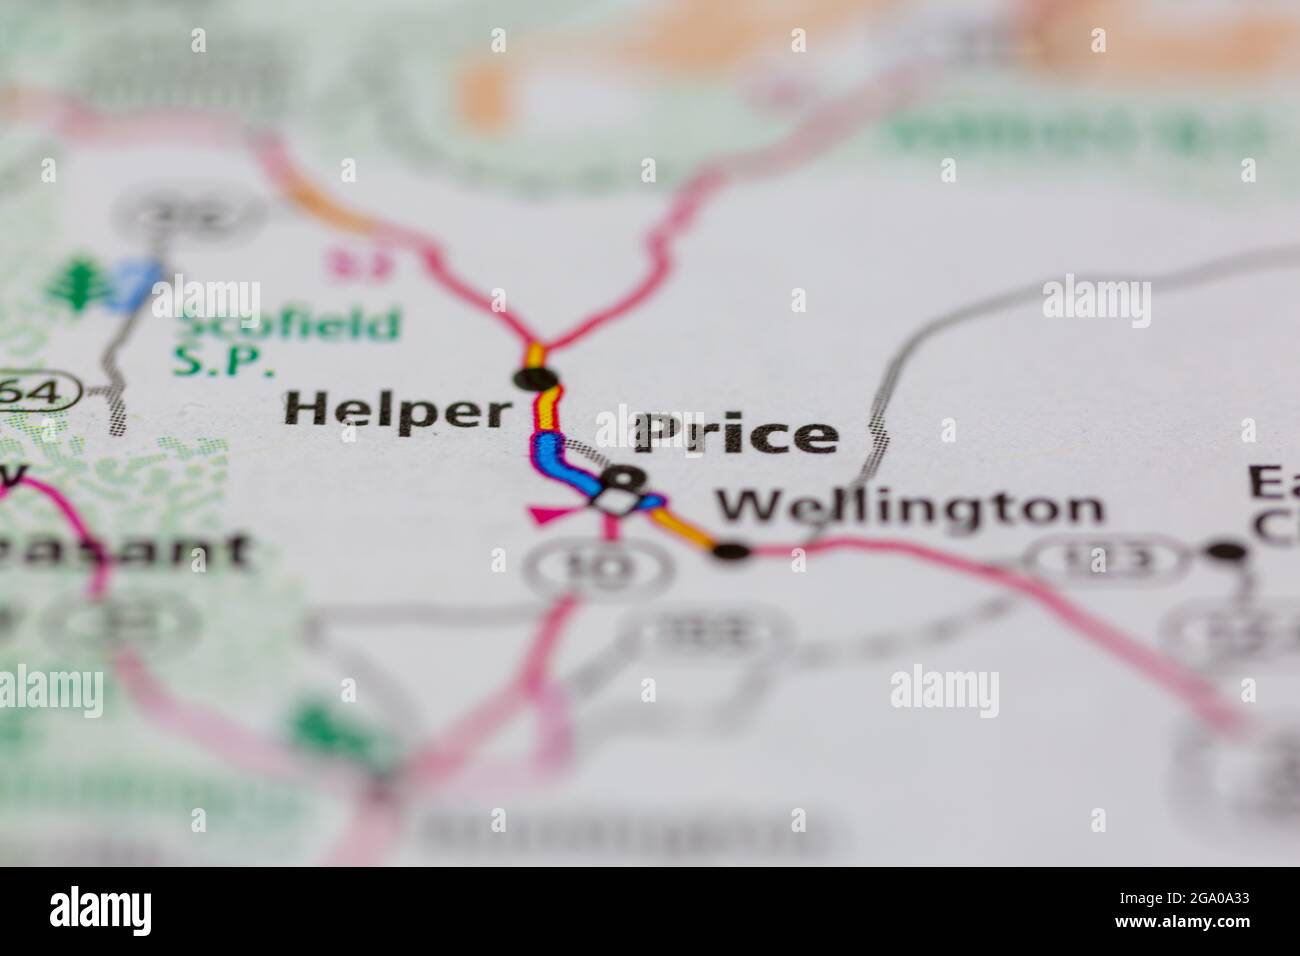 Price Utah USA shown on a road map or Geography map Stock Photo